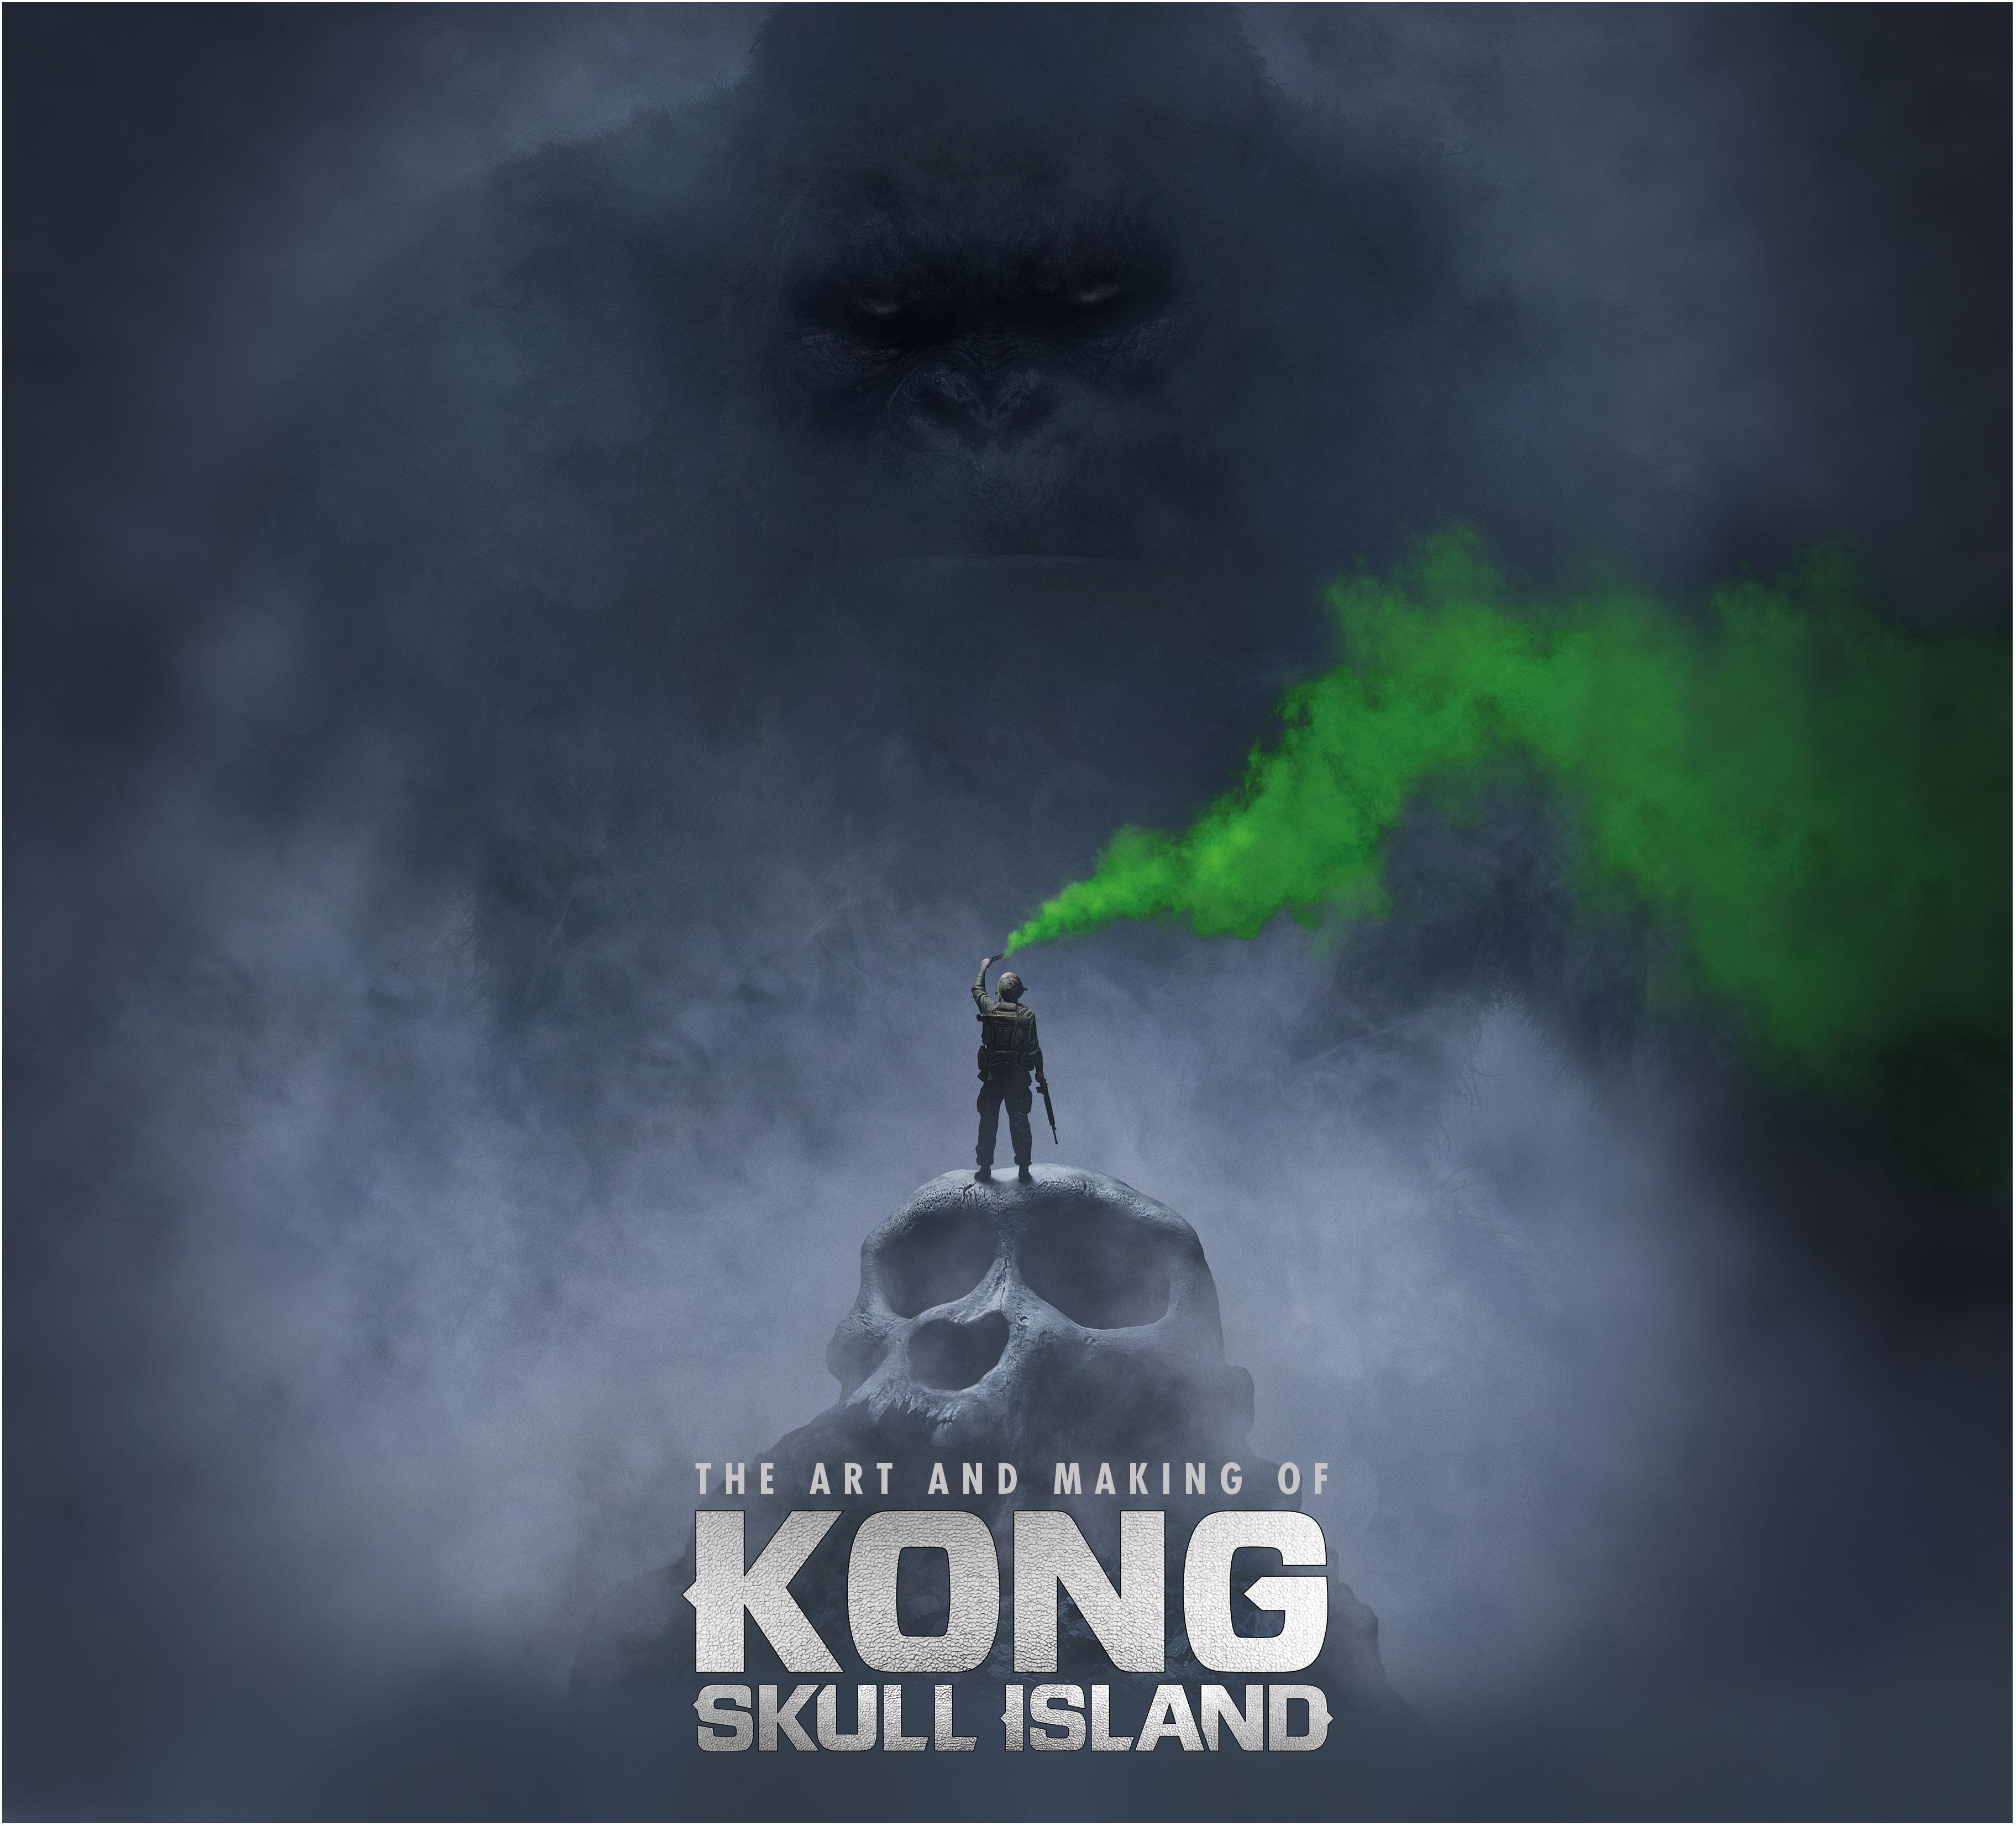 The Art and Making of Kong. Skull Island